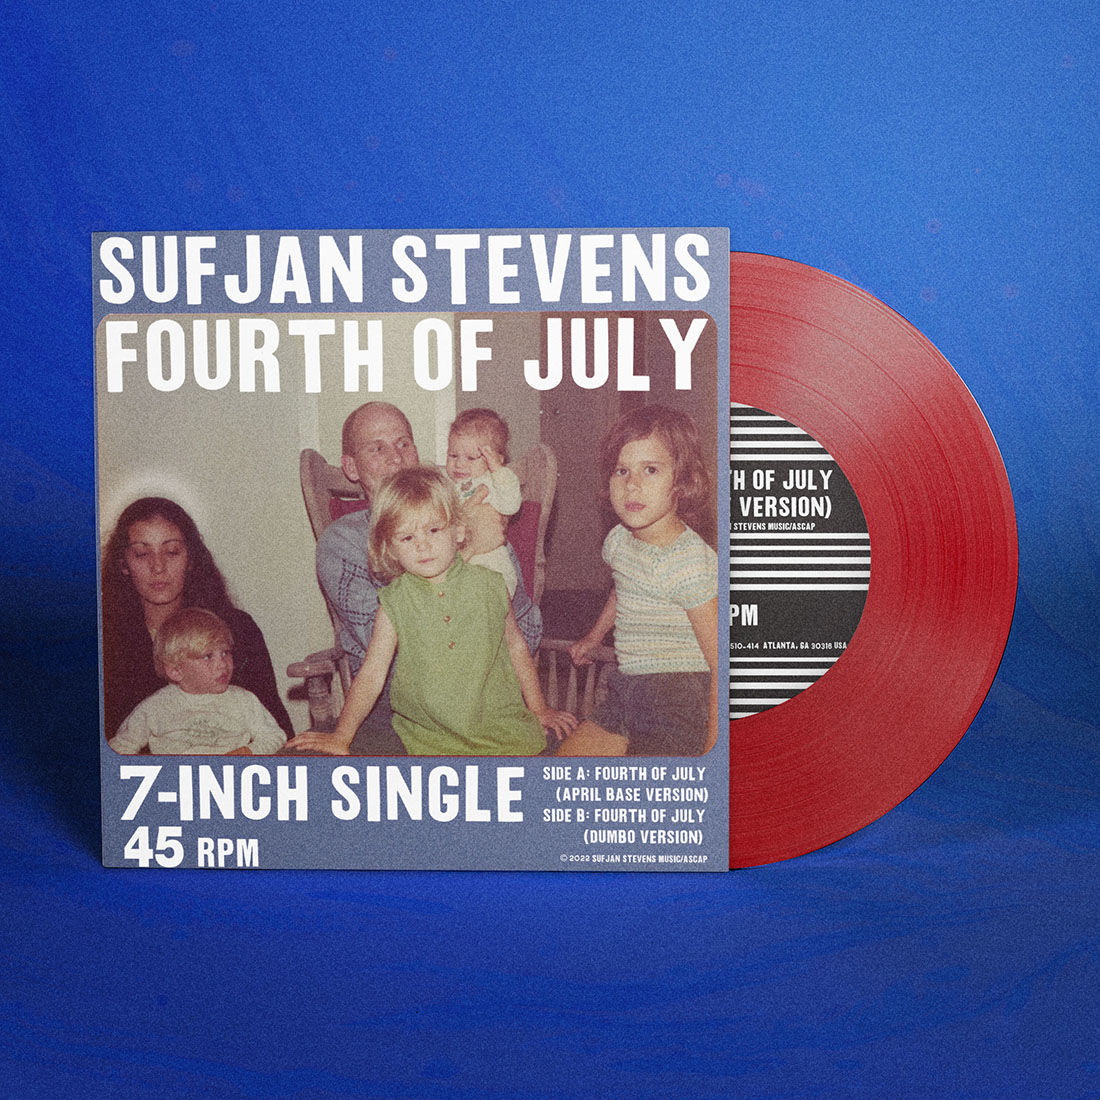 Fourth of July: Limited Opaque Red 7" Single